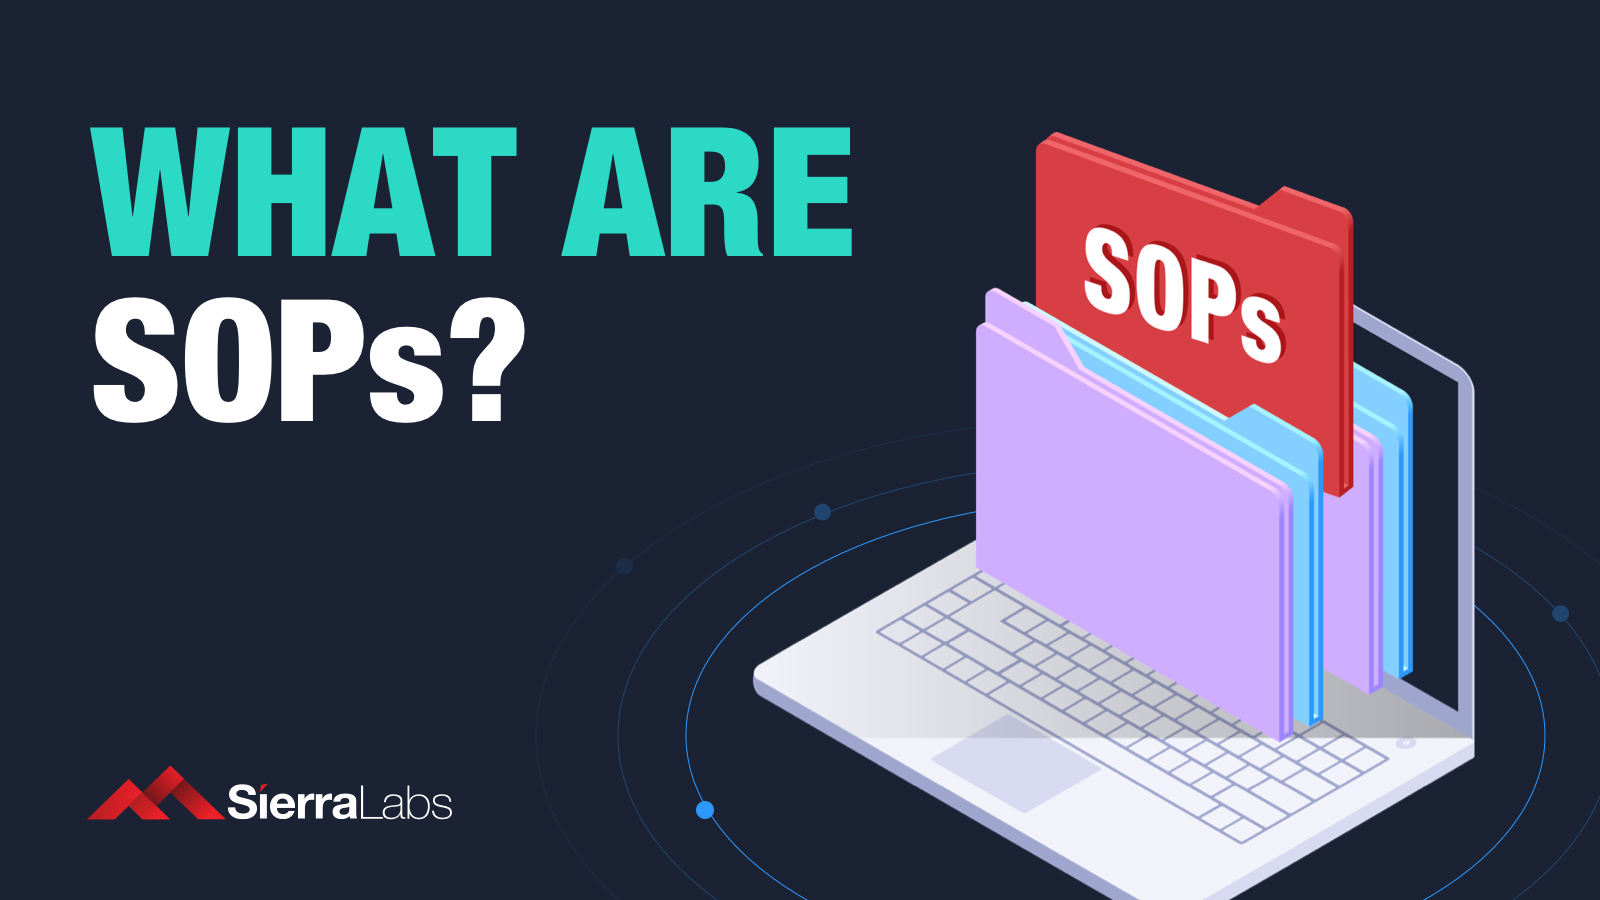 What are SOPs?